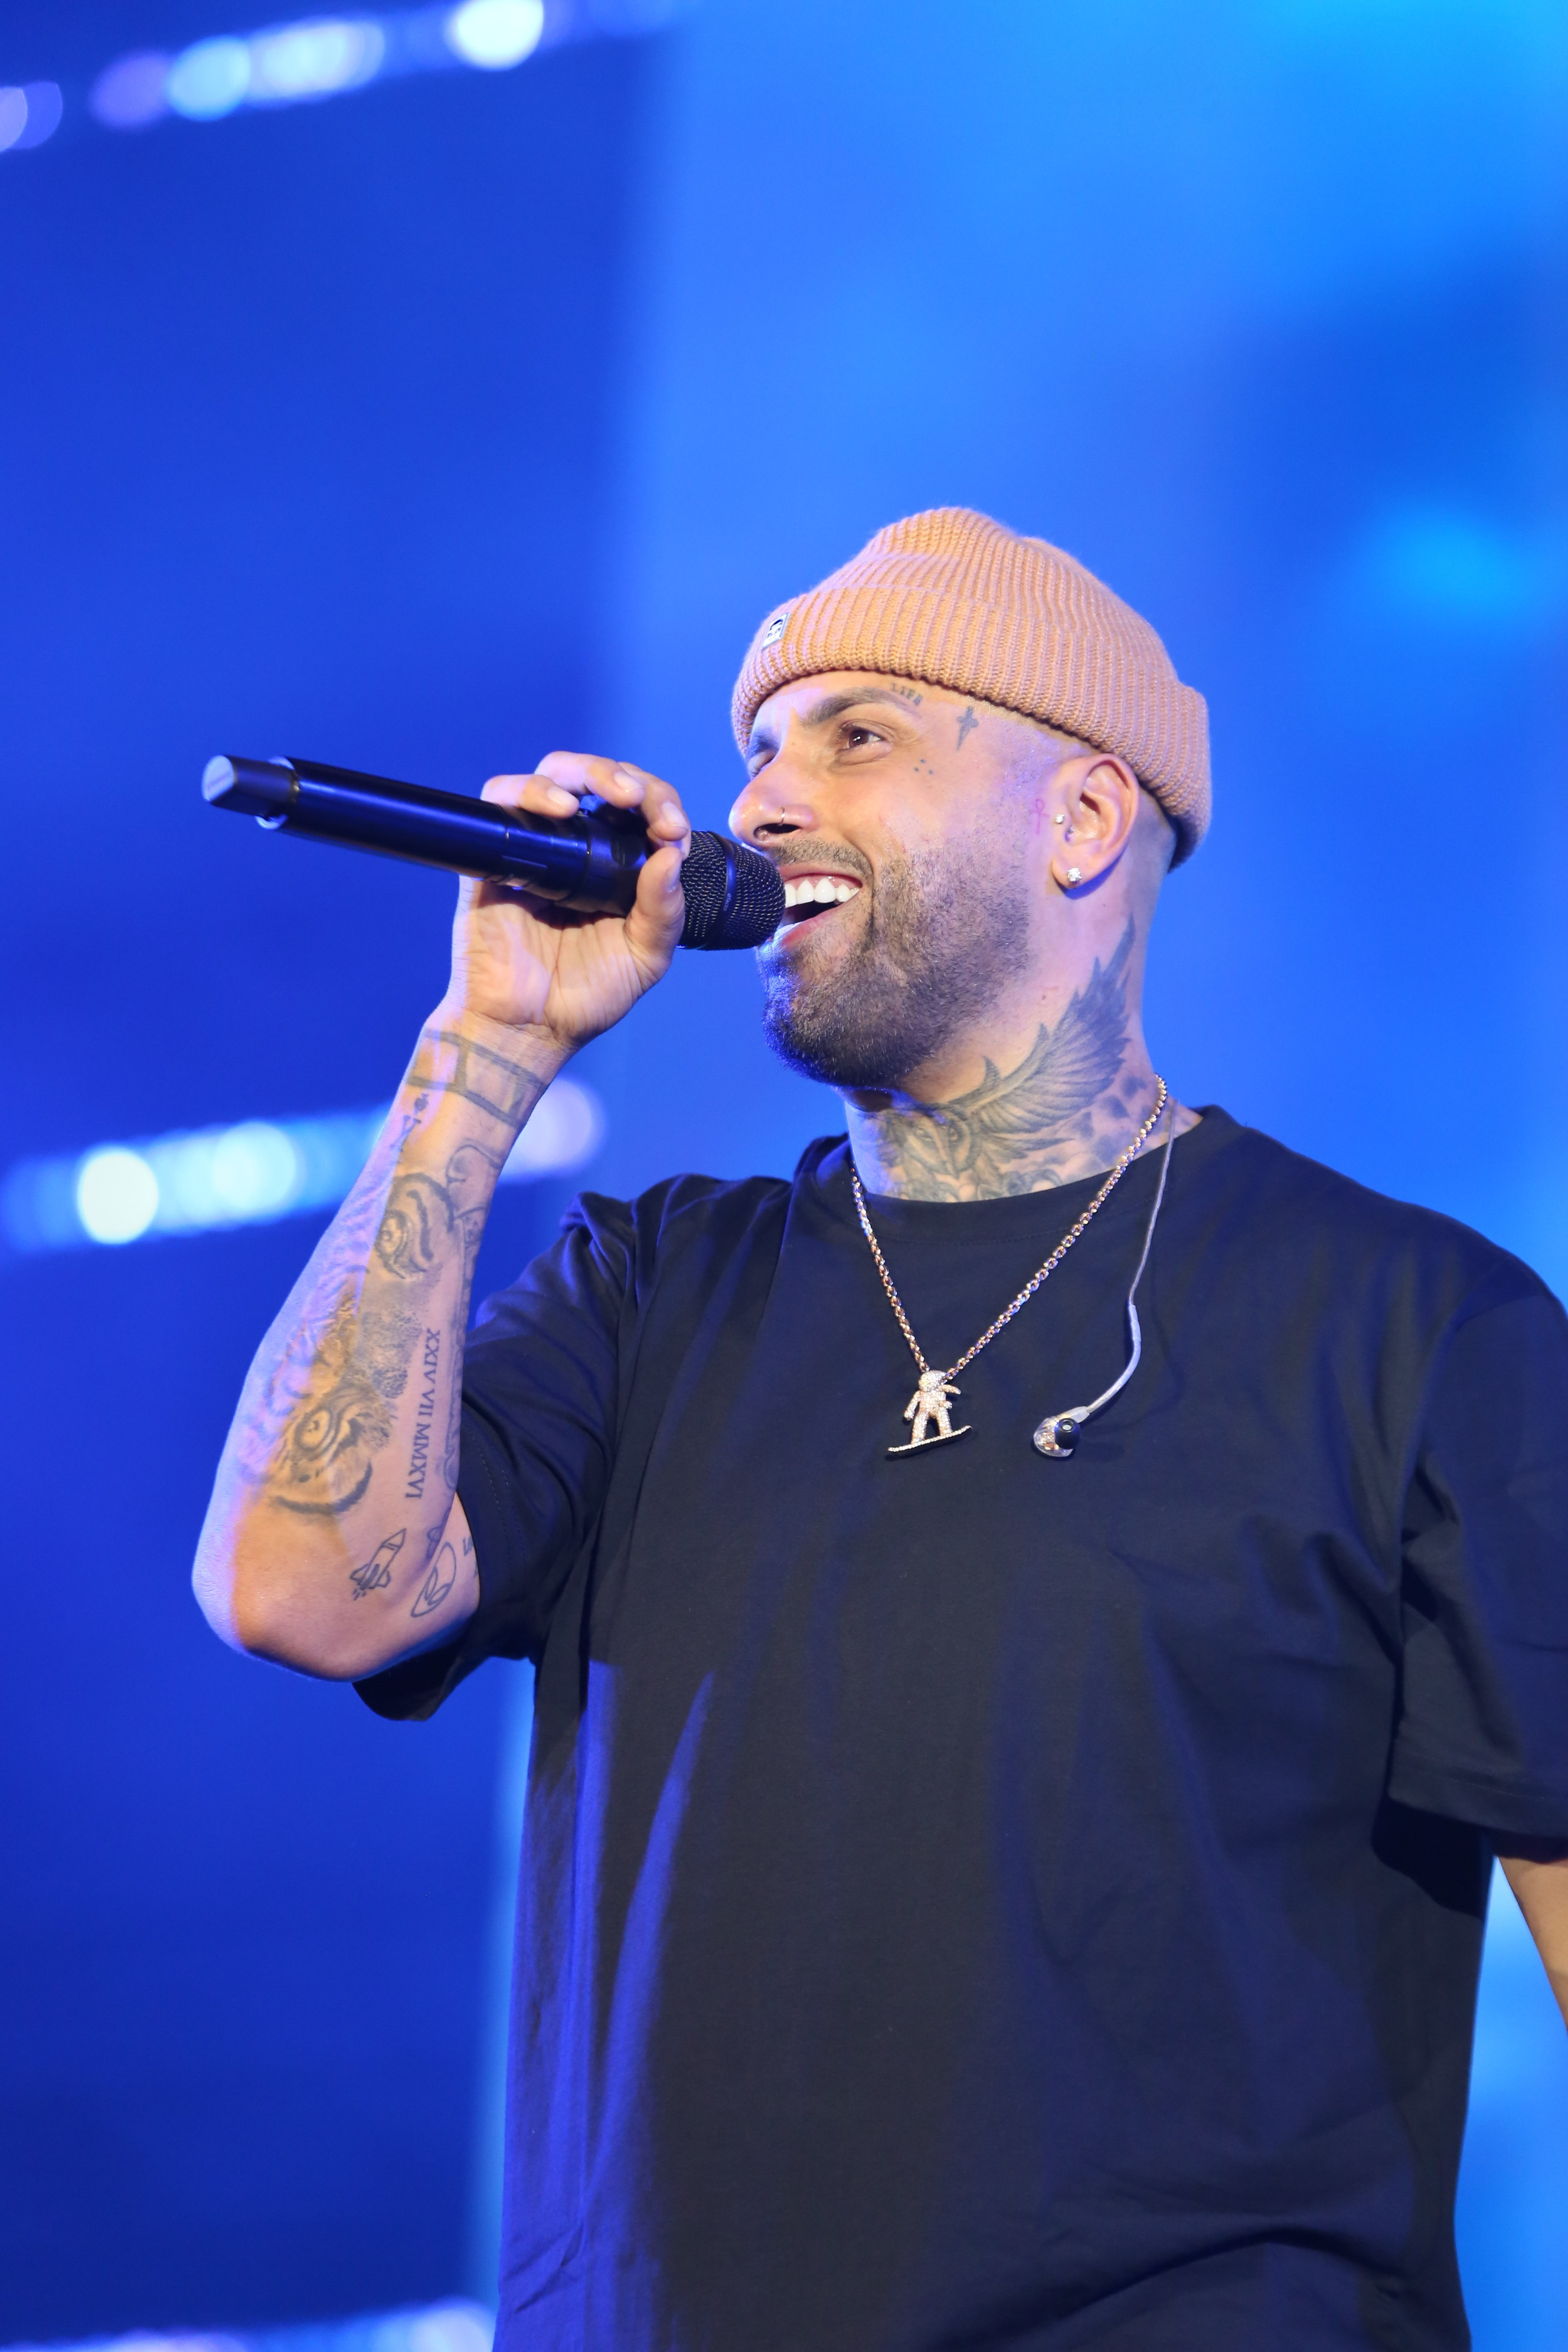 Nicky Jam performs during the Machaca Fest 2022